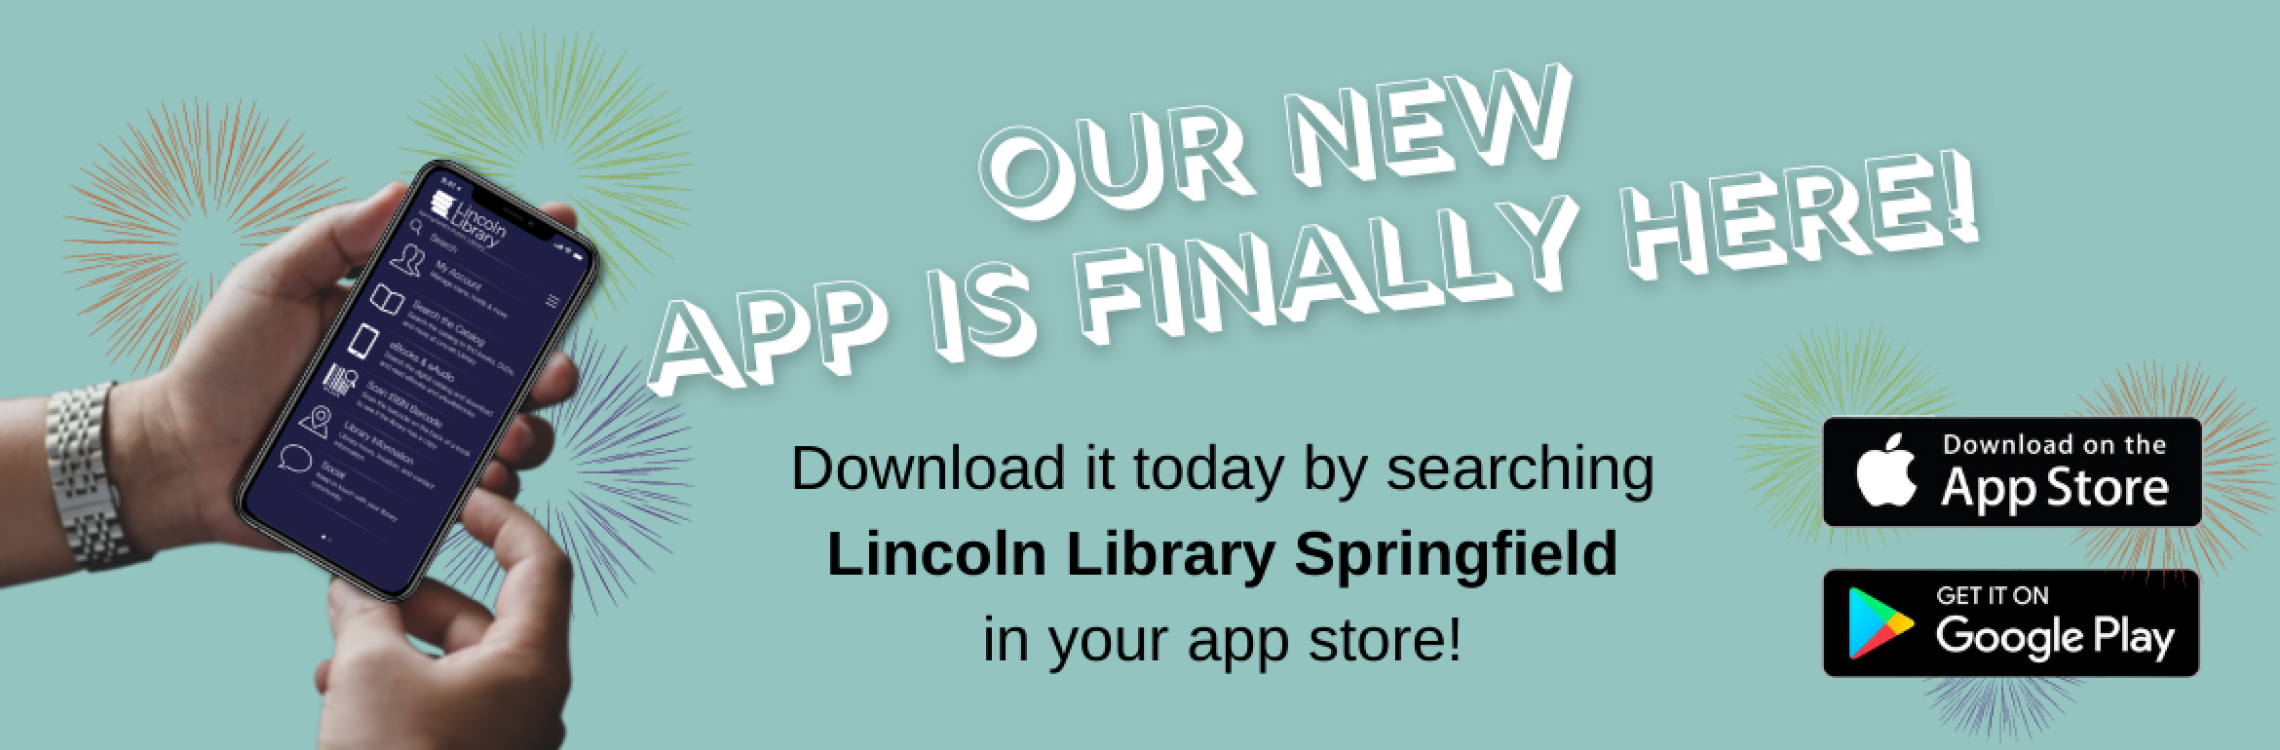 Our new app is finally here! Download it today by searching Lincoln Library Springfield in your app store.